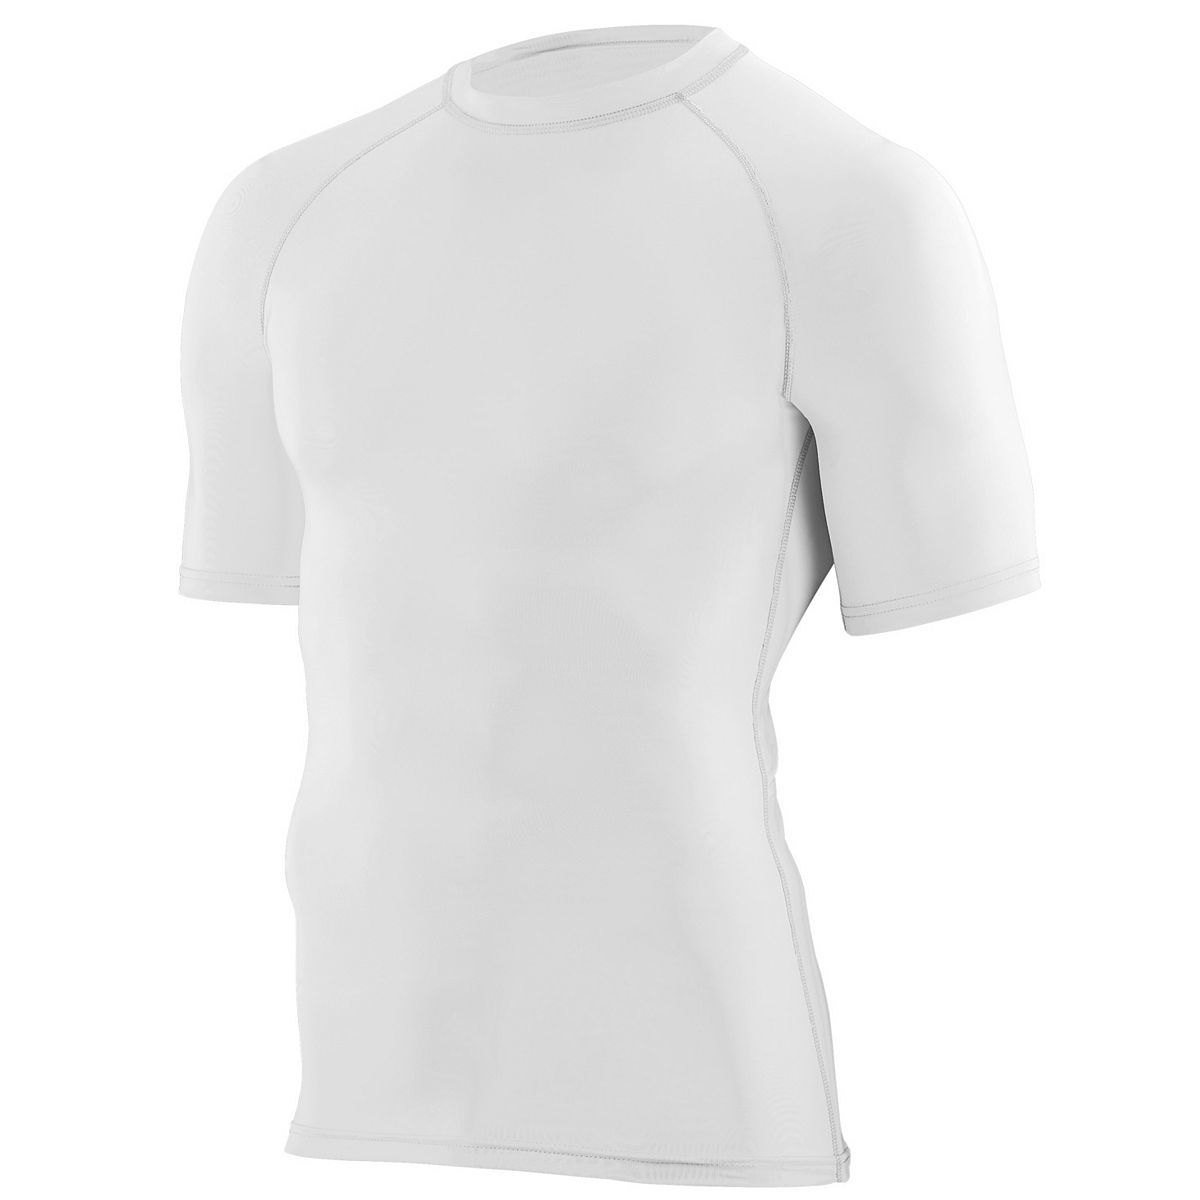 Youth Hyperform Compression Short Sleeve Tee - 2601